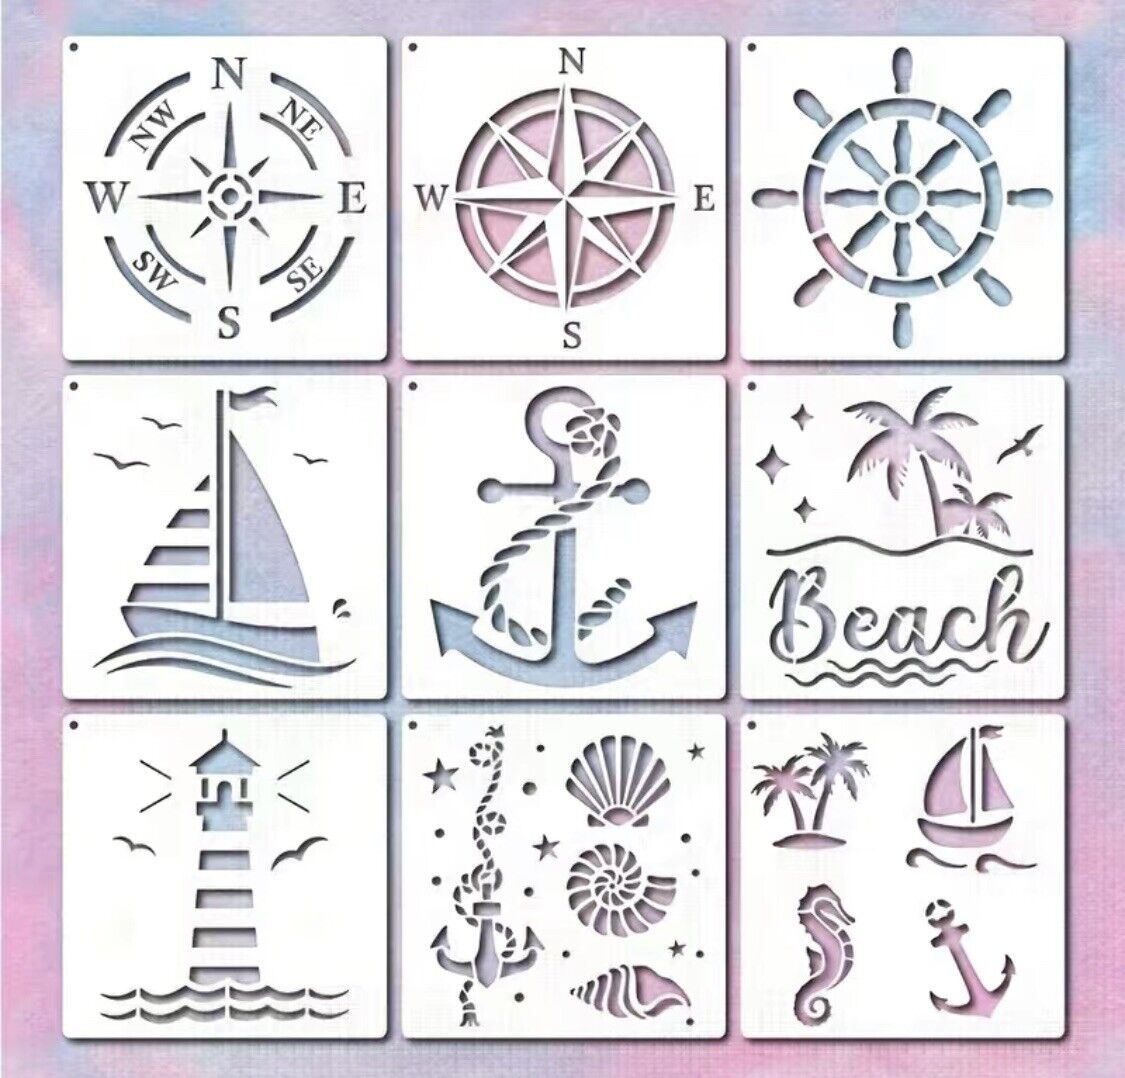 Sails Lot Of 9 Nautical Compass Seascape Stencils 5.9x5.9 Inches Very Nice